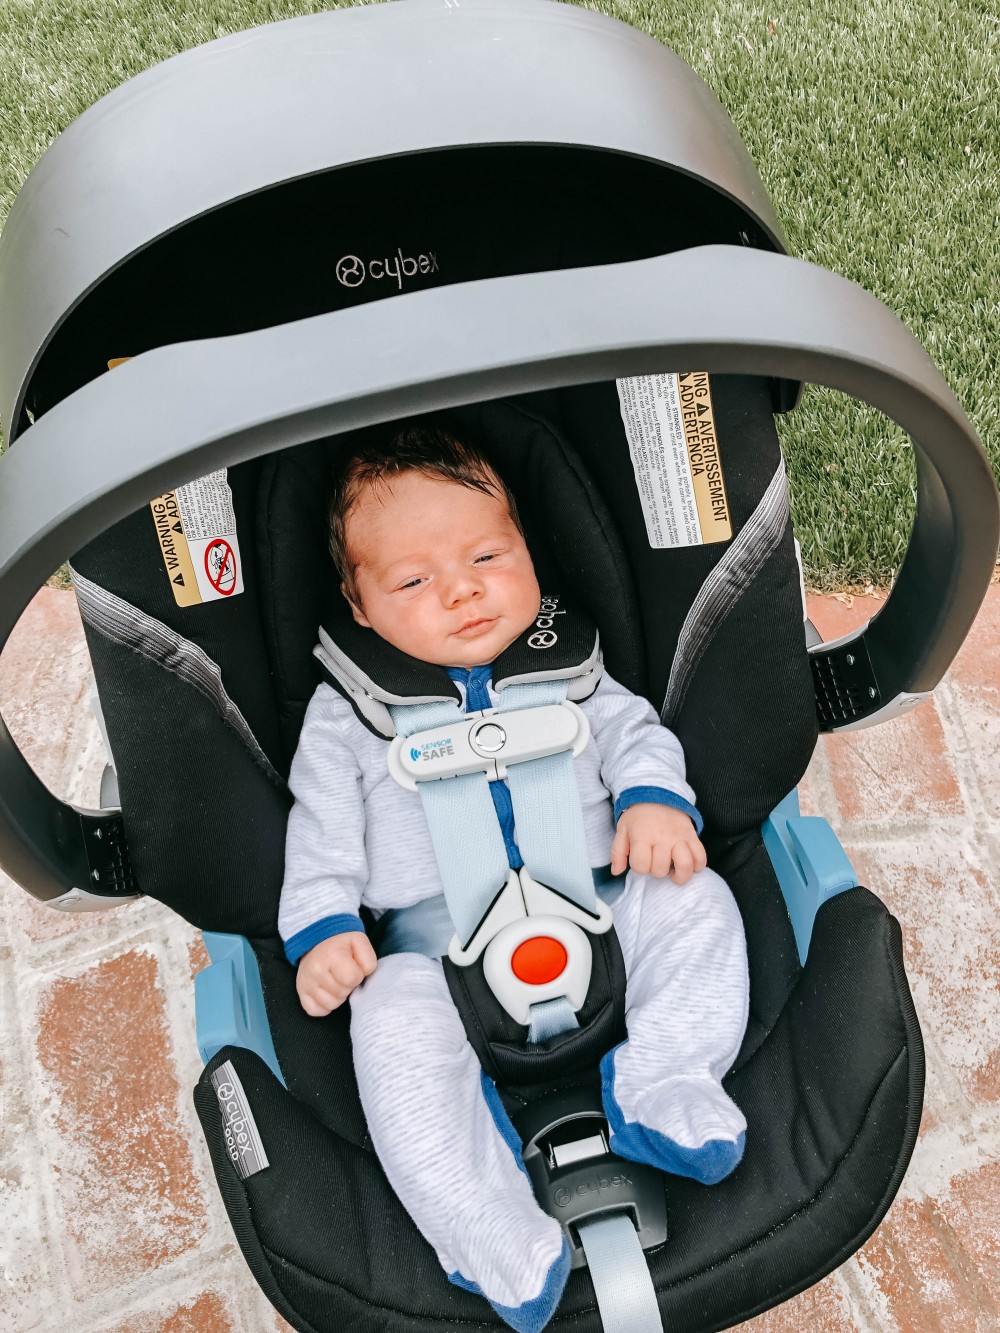 Cybex Sirona M Review - Car Seats For The Littles